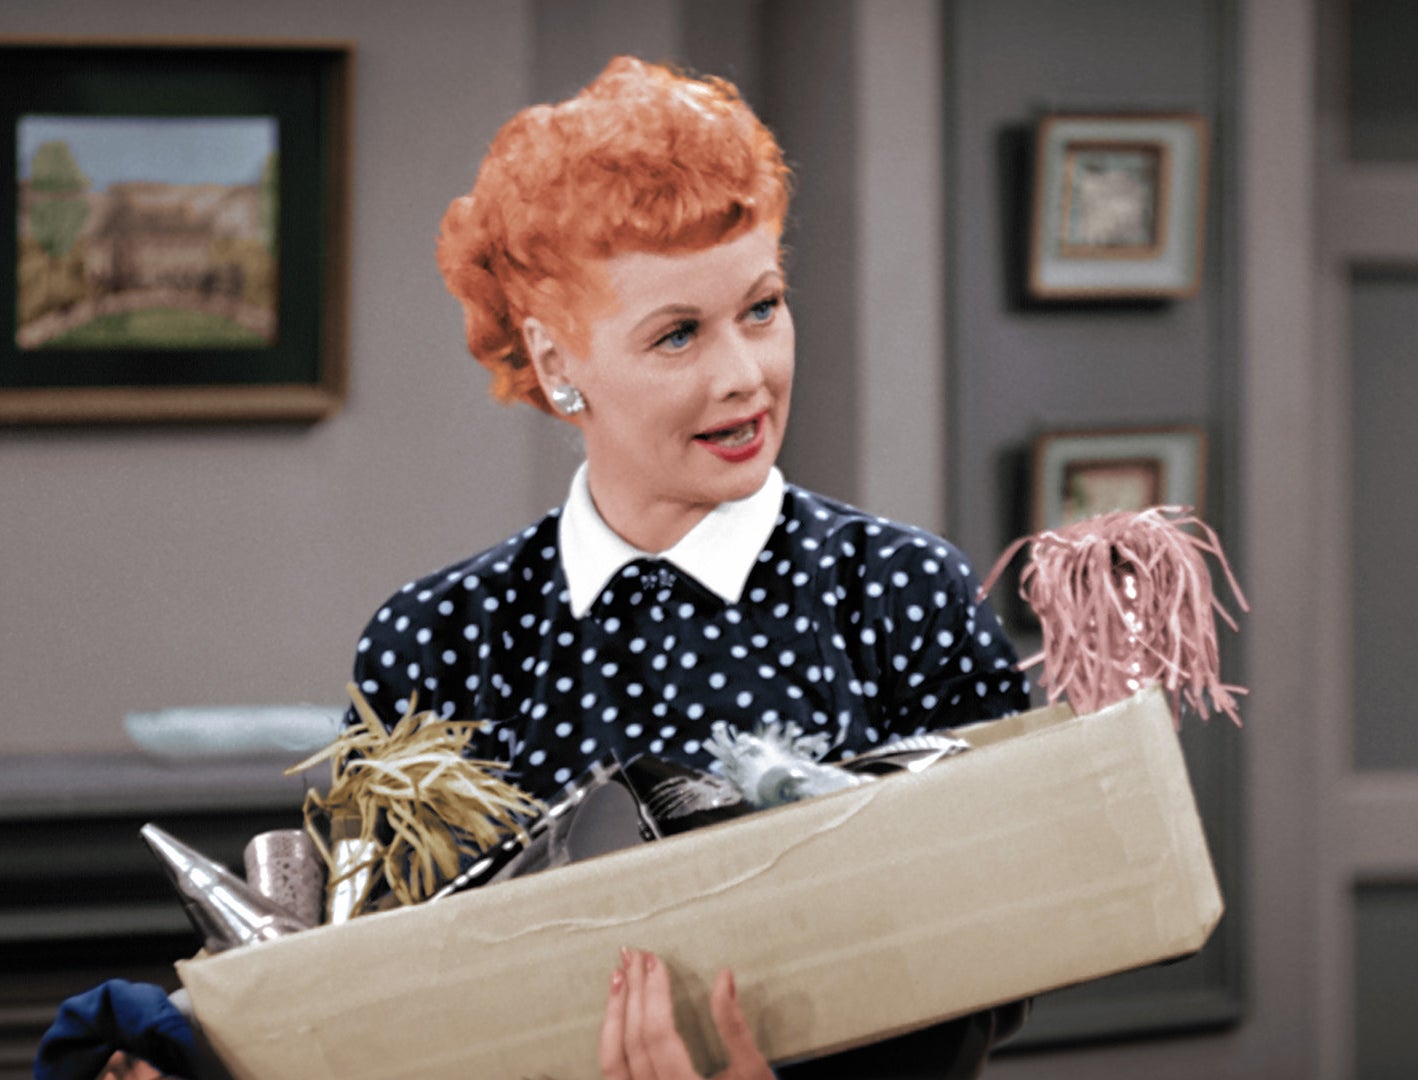 I LOVE LUCY SUPERSTAR SPECIAL, a new one-hour special featuring two colorized back-to-back classic episodes of the 1950s series, will be broadcast Sunday, May 17 (8:00-9:00 PM, ET/PT) on the CBS Television Network